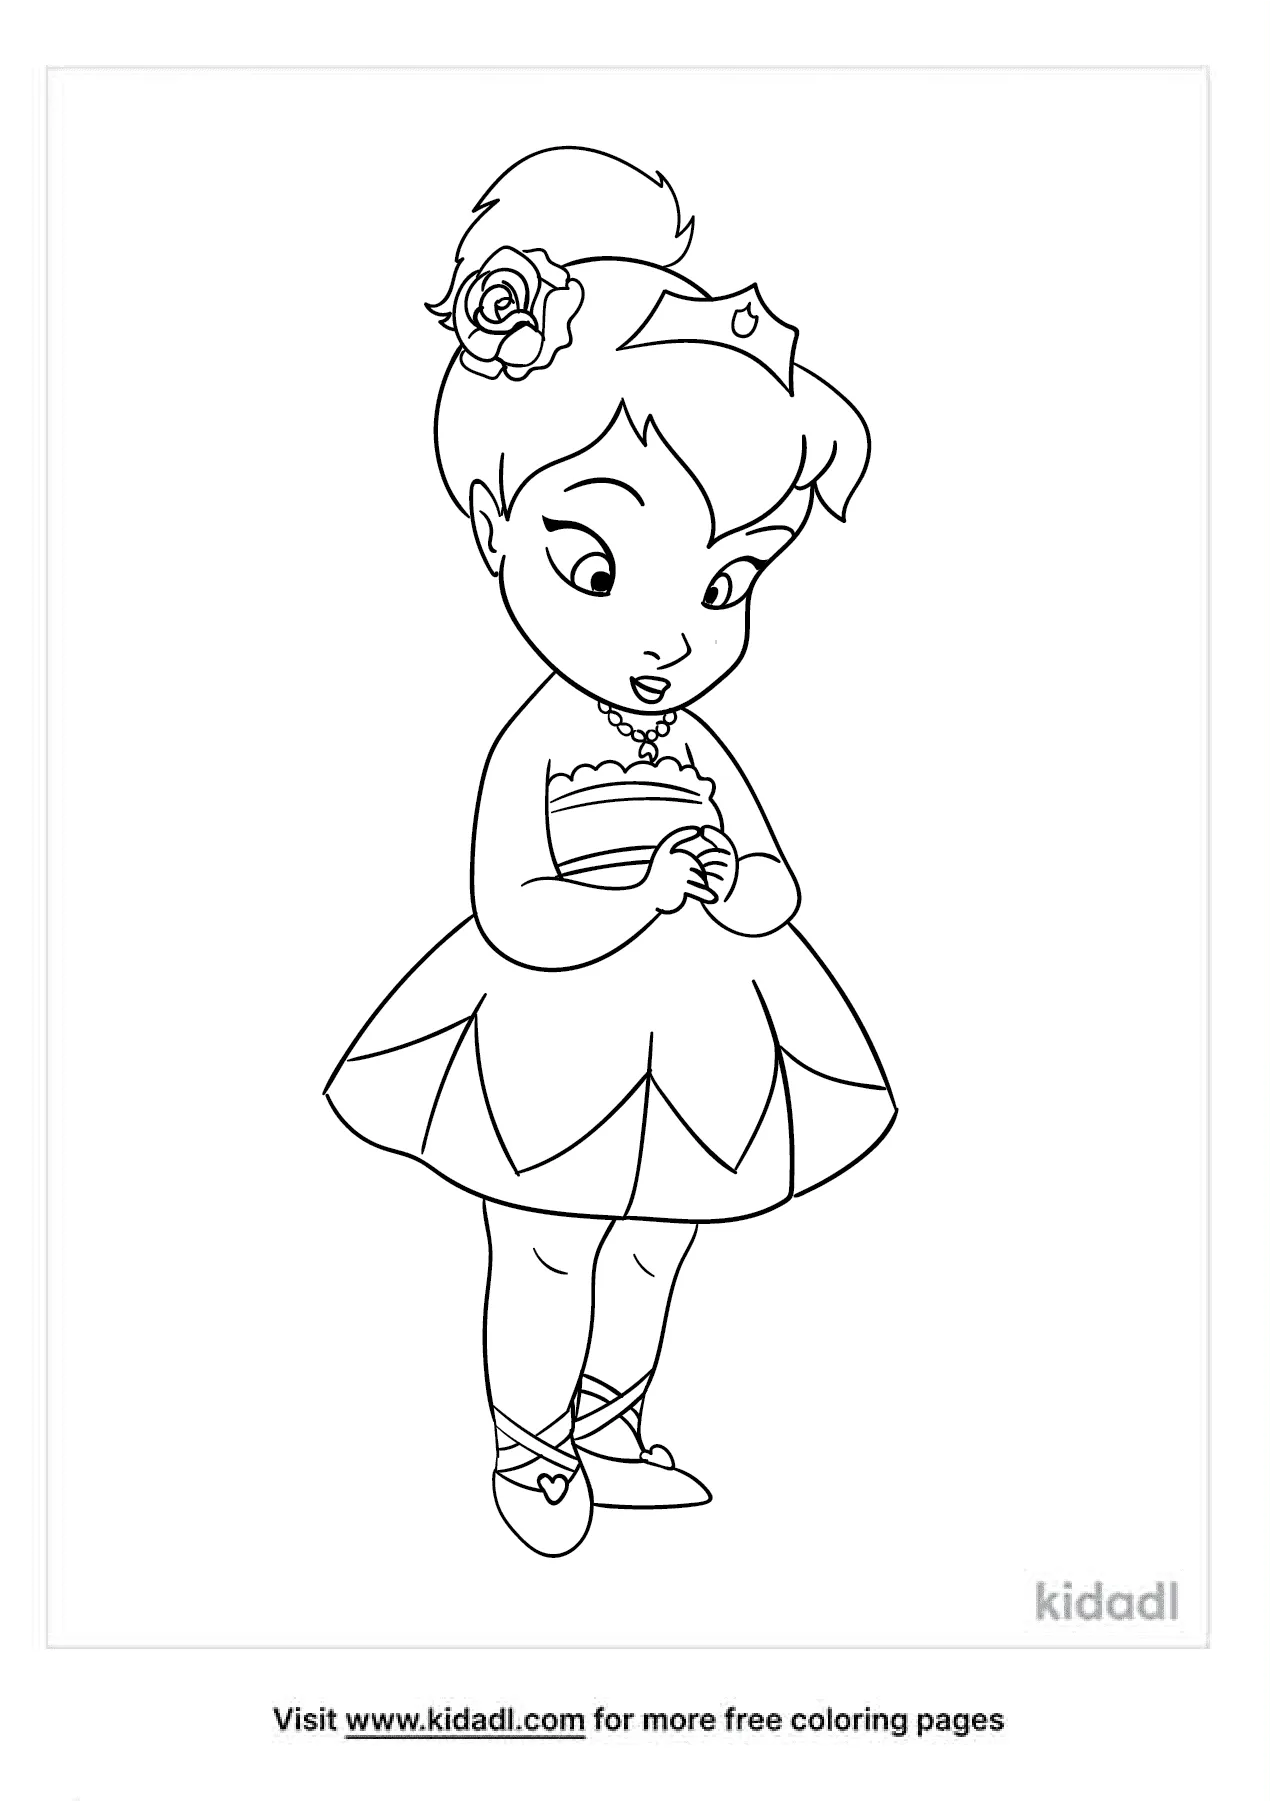 Baby Princess Coloring Pages   Free Princess Coloring Pages   Kidadl